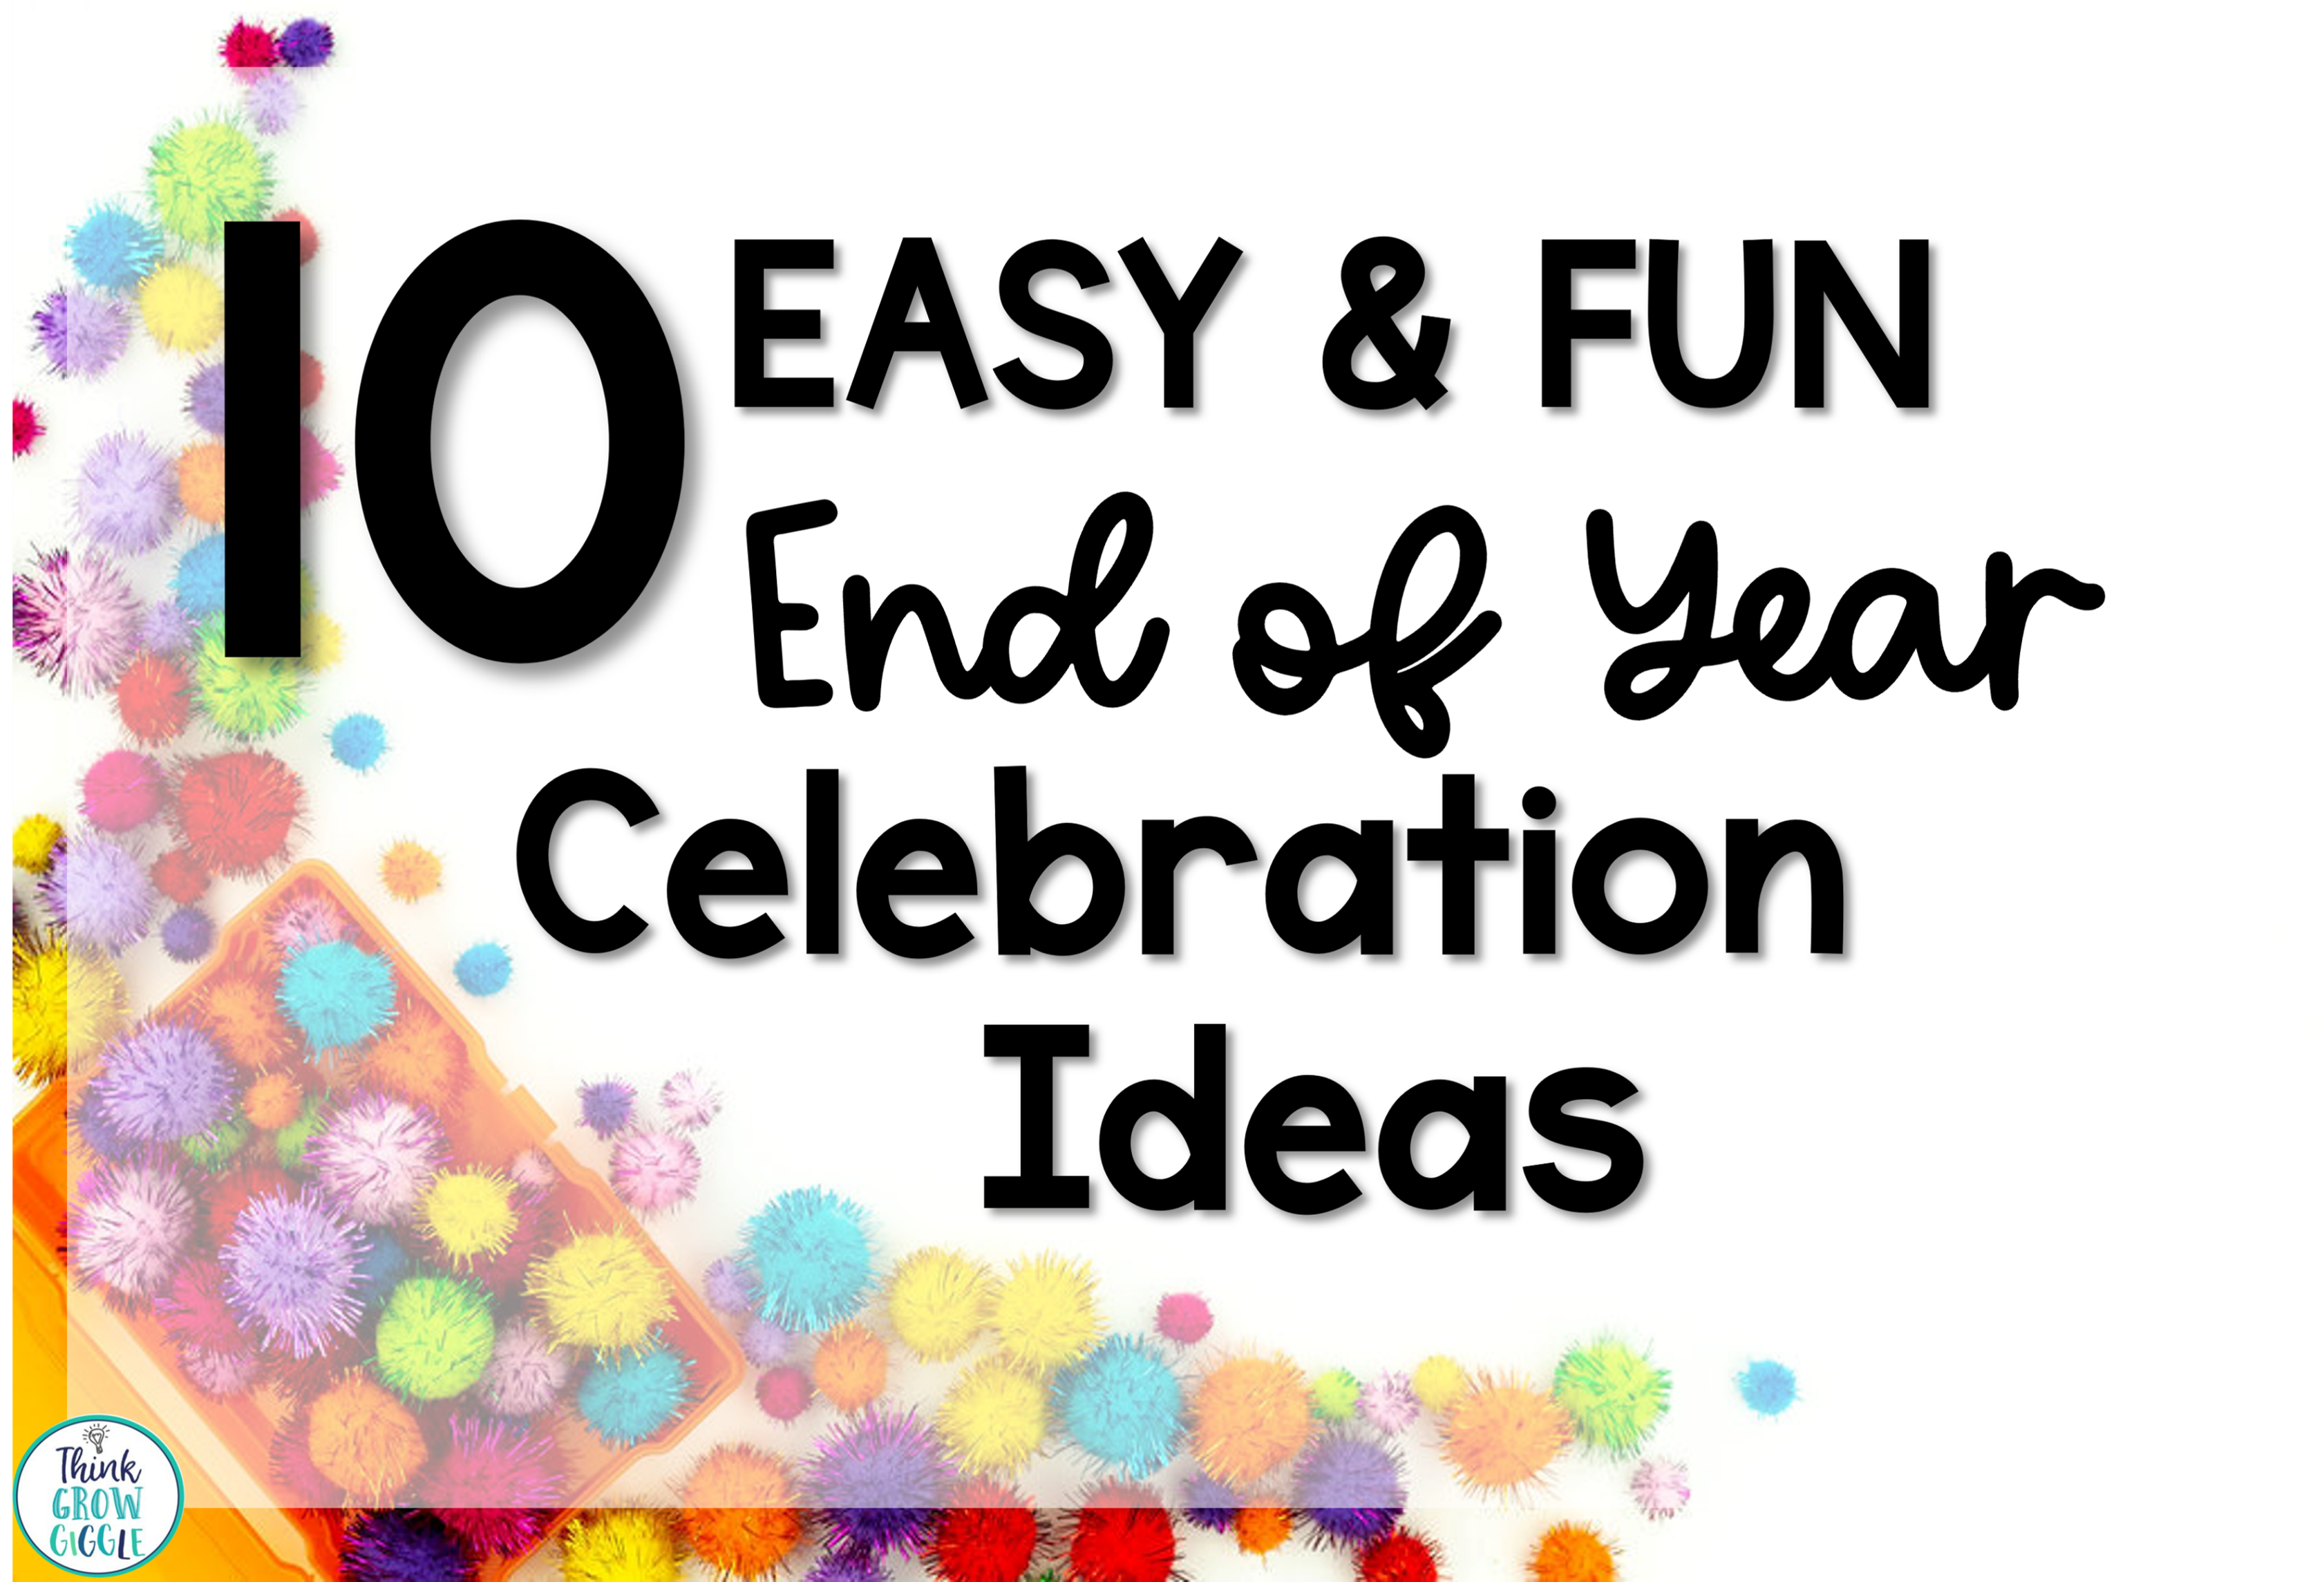 10 Easy and Fun End of Year Celebration Ideas for Upper Elementary Classrooms